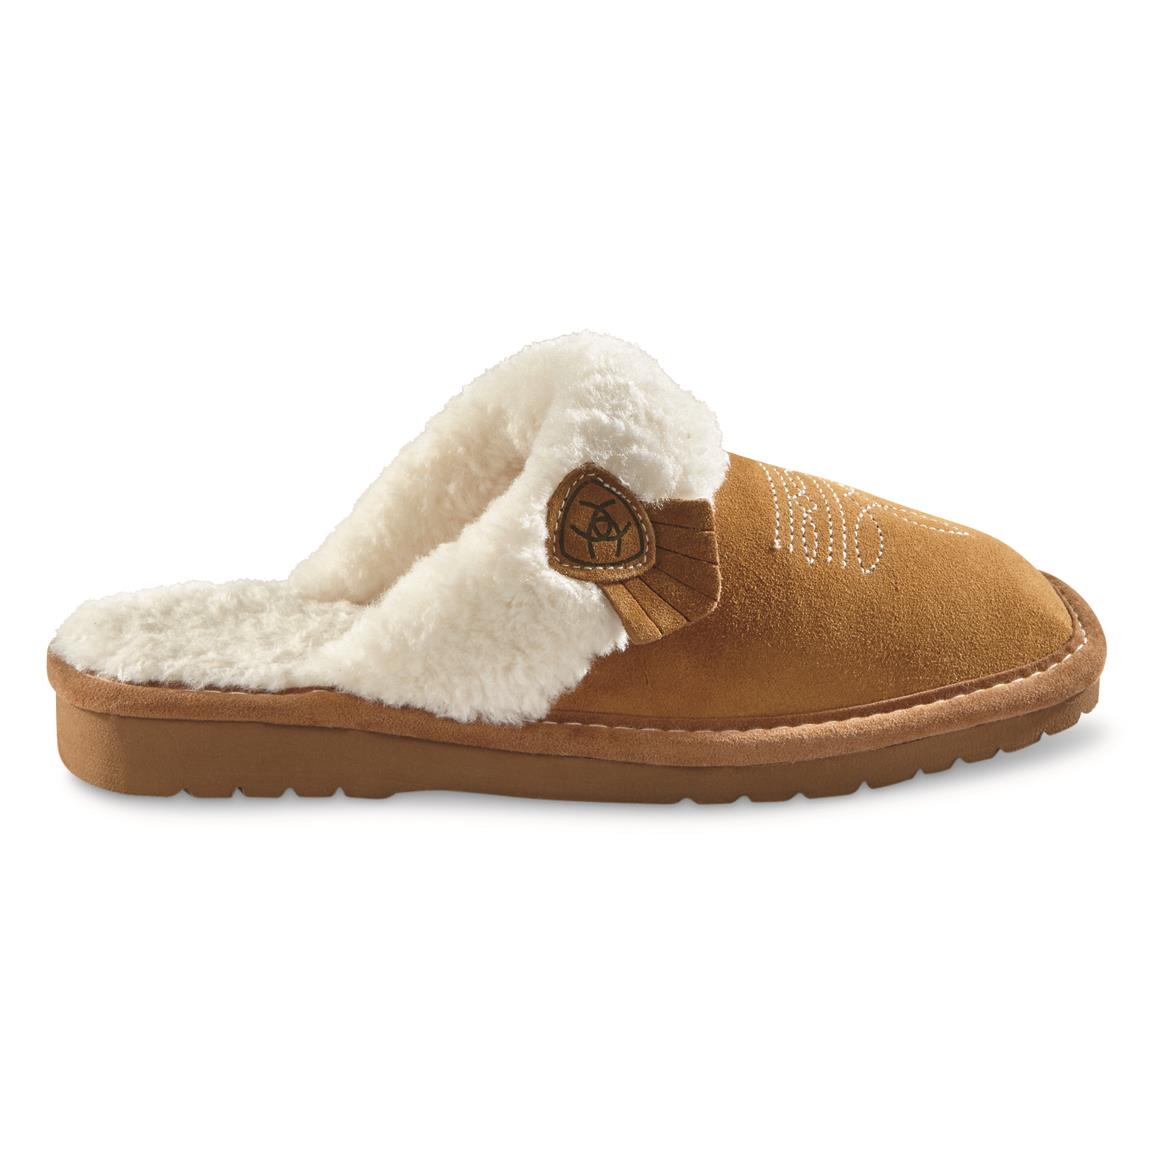 Ariat Slippers | Sportsman's Guide